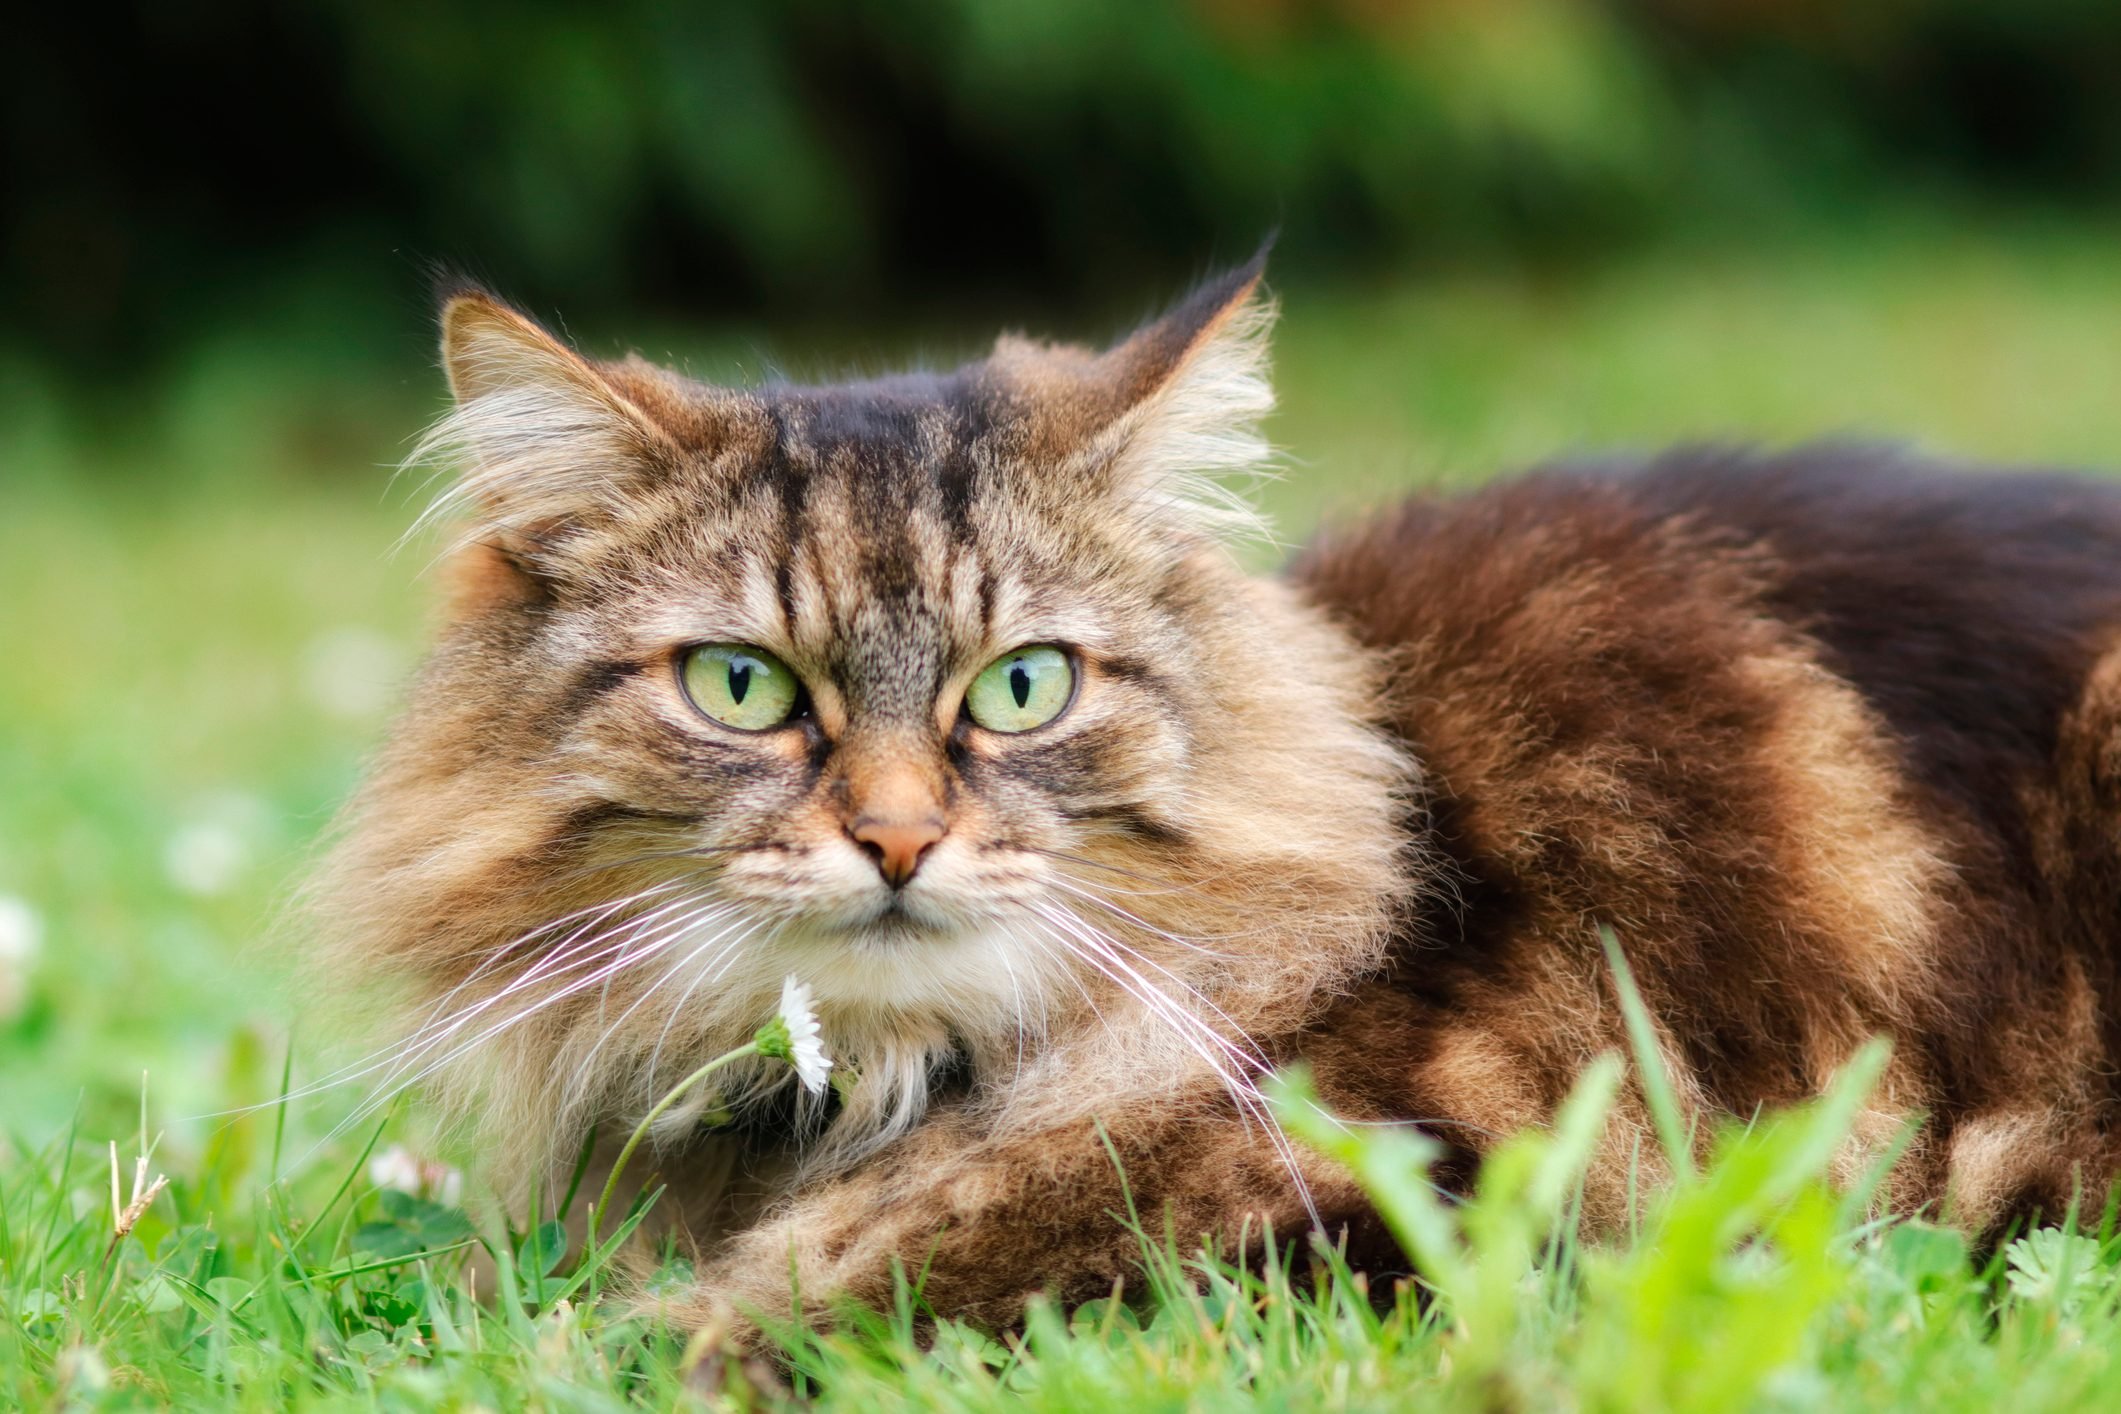 15 Small Cat Breeds That Are Kittens for Life